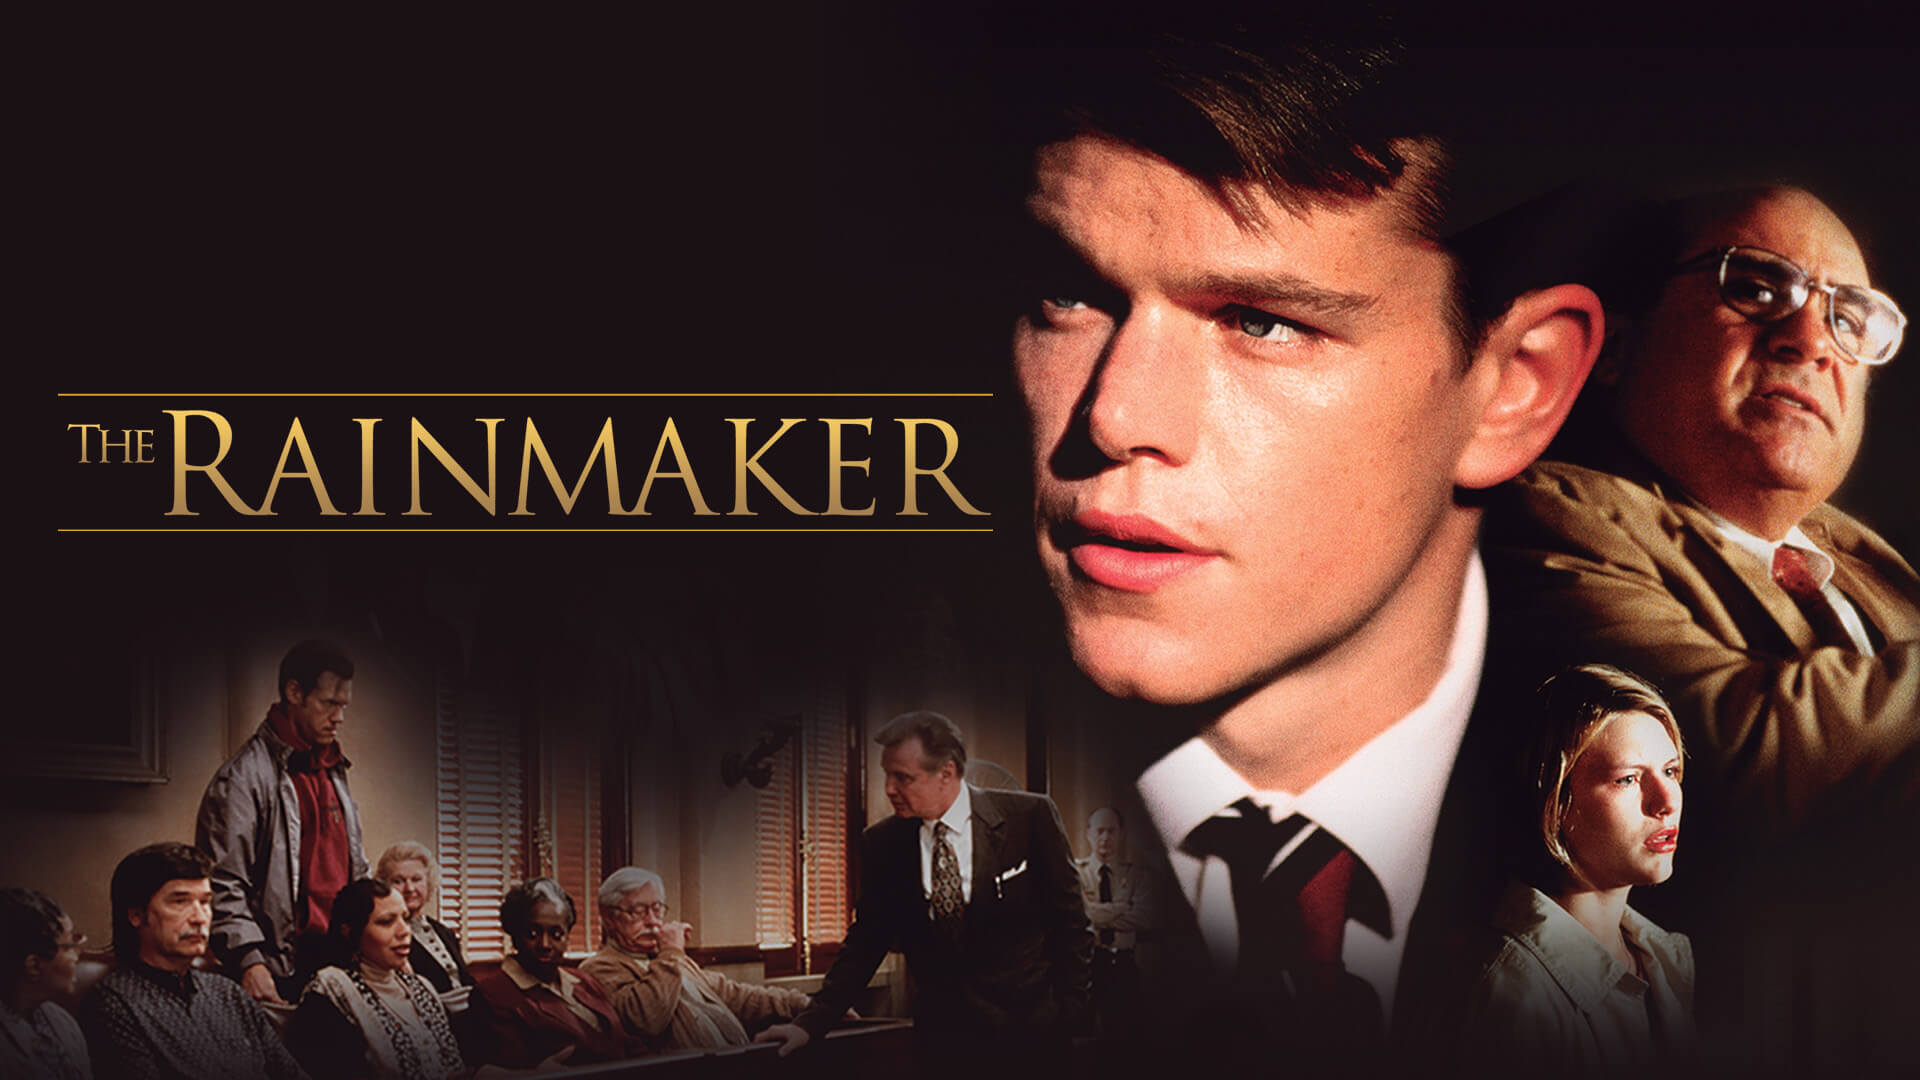 35 Facts about the movie The Rainmaker - Facts.net